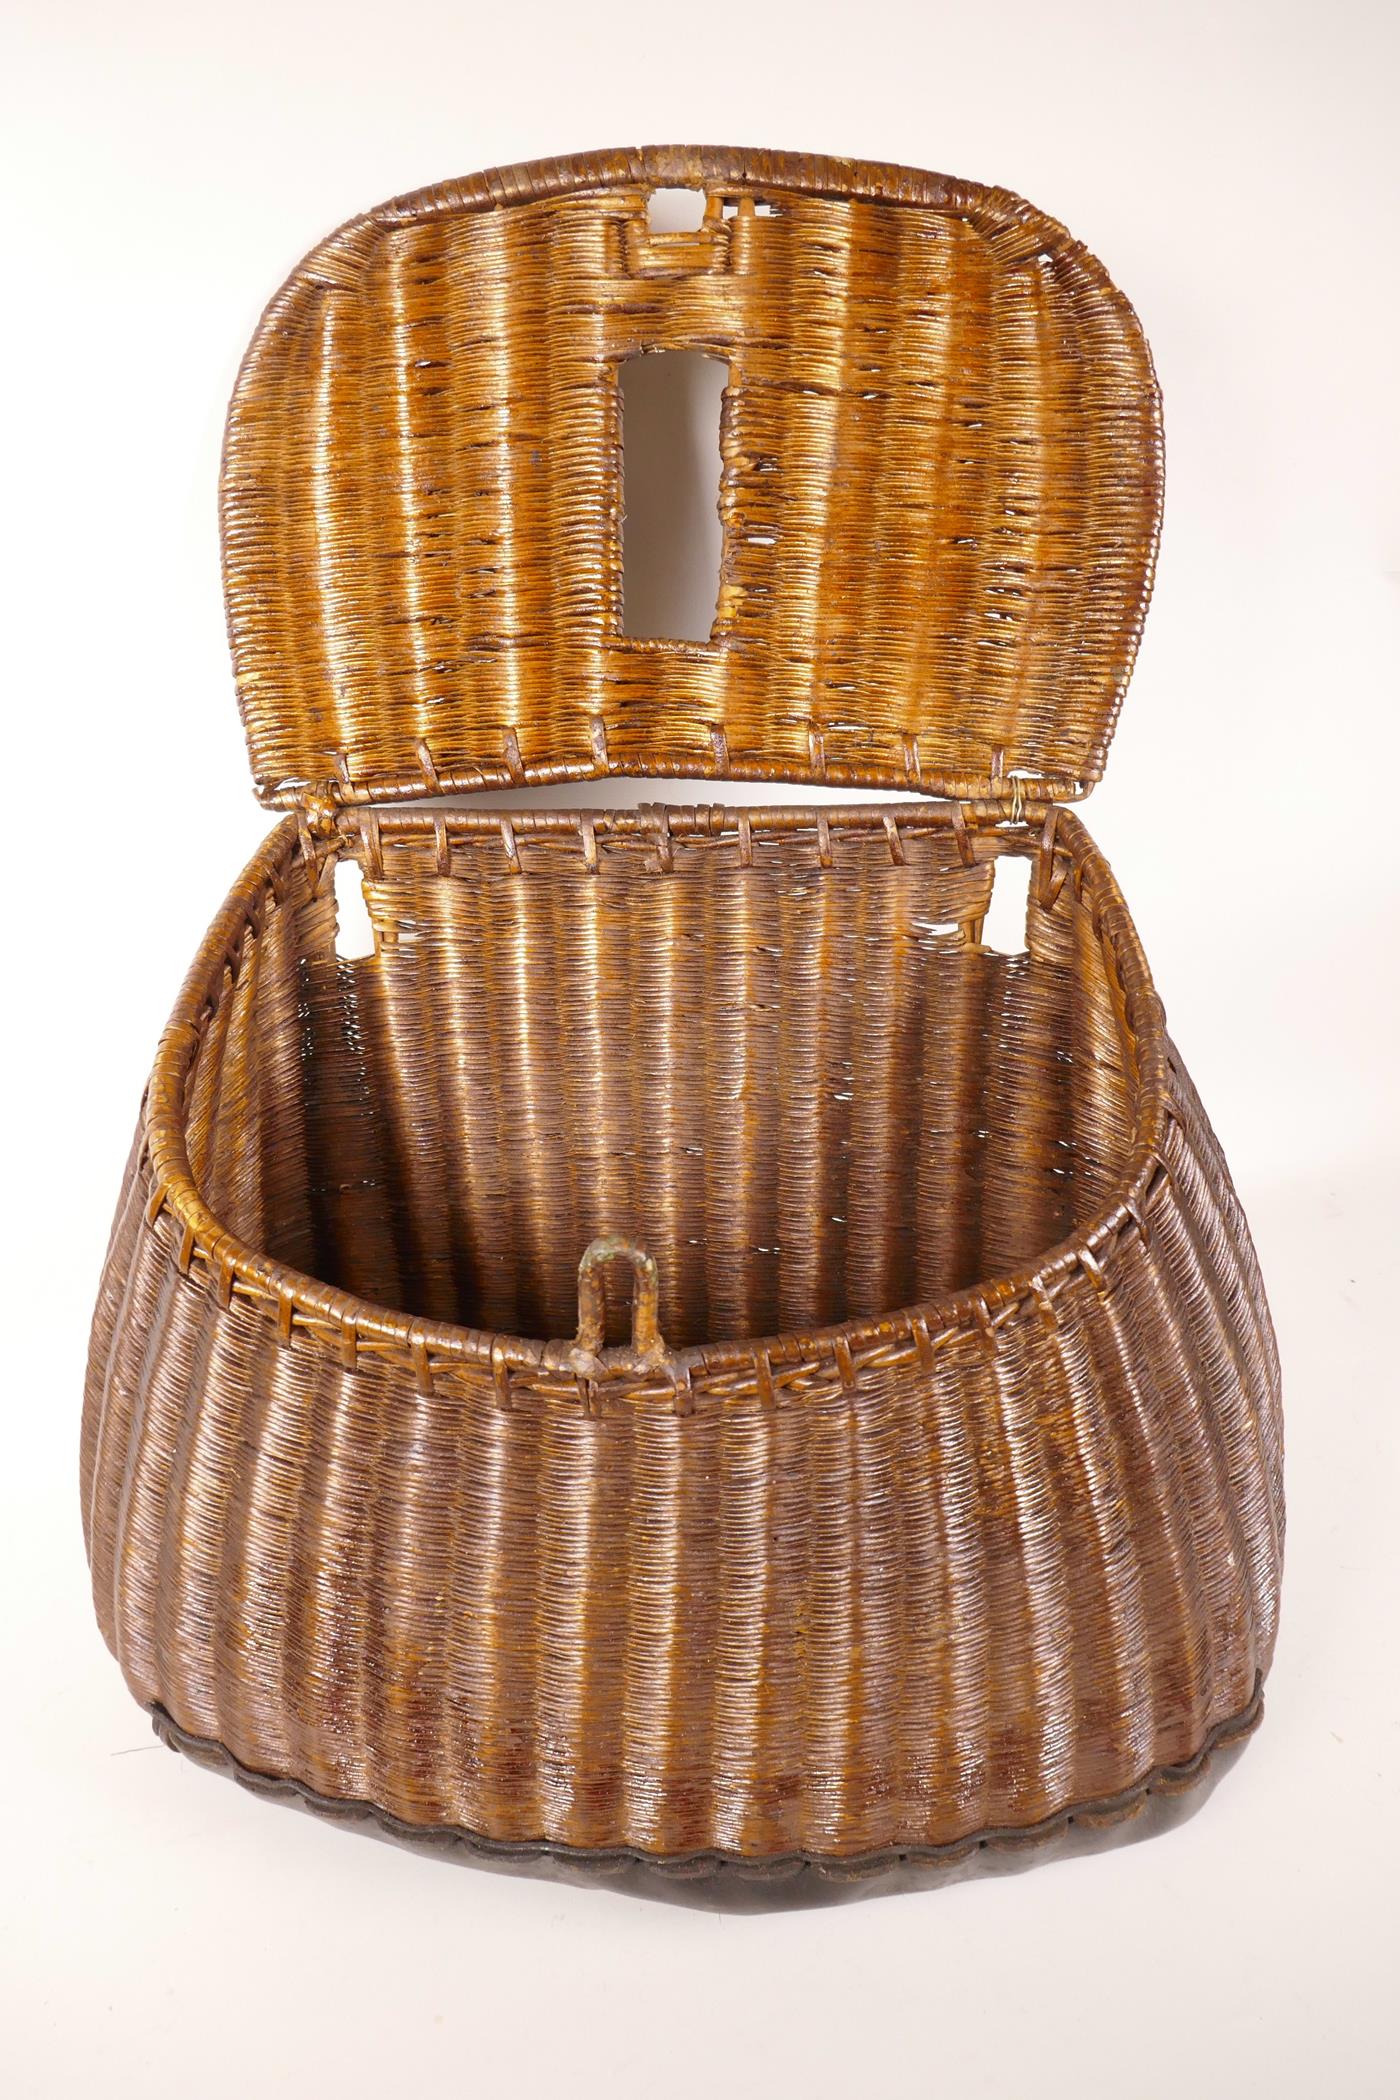 An antique woven fishing basket (creel), 13" wide - Image 2 of 4